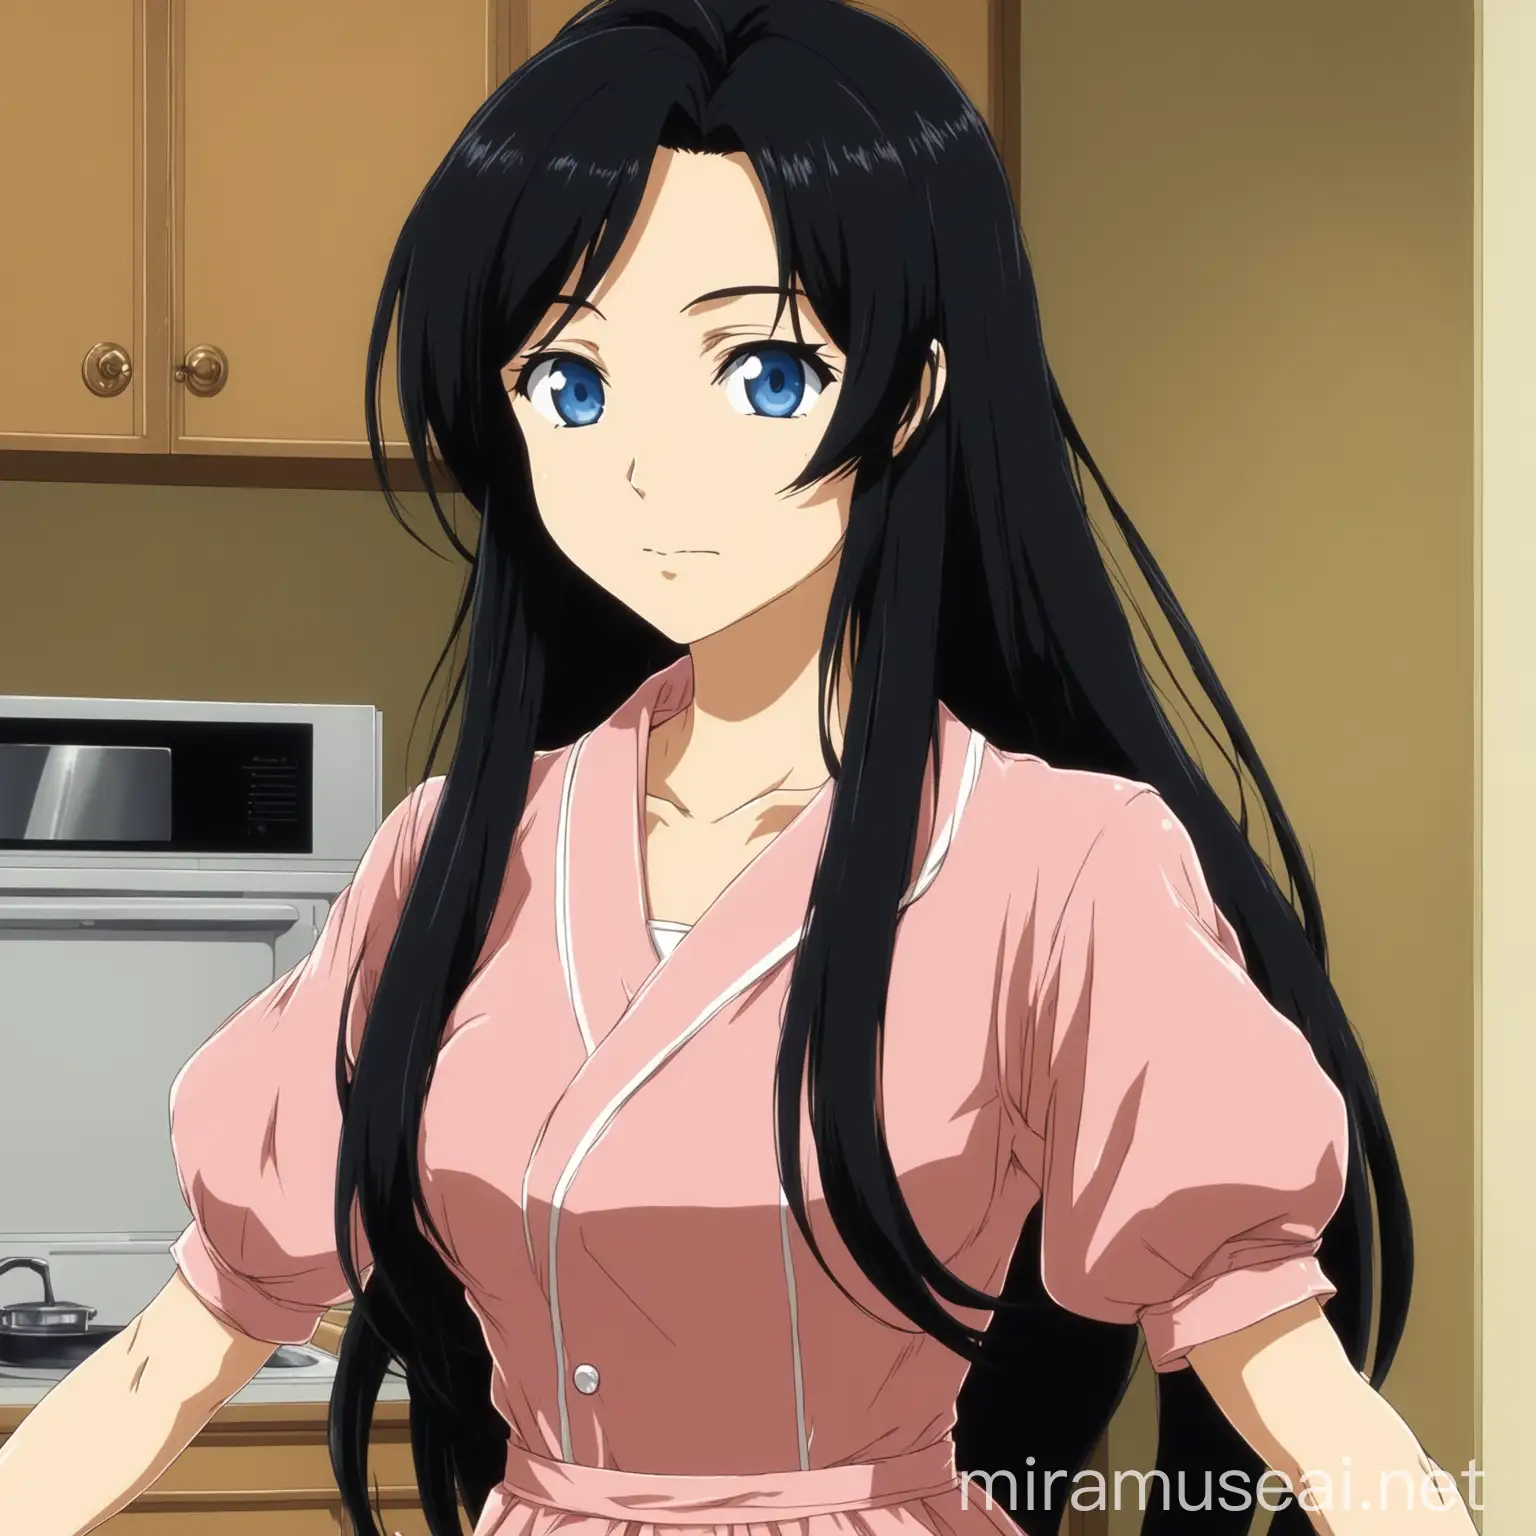 AnimeInspired 30YearOld Housewife with Long Black Hair